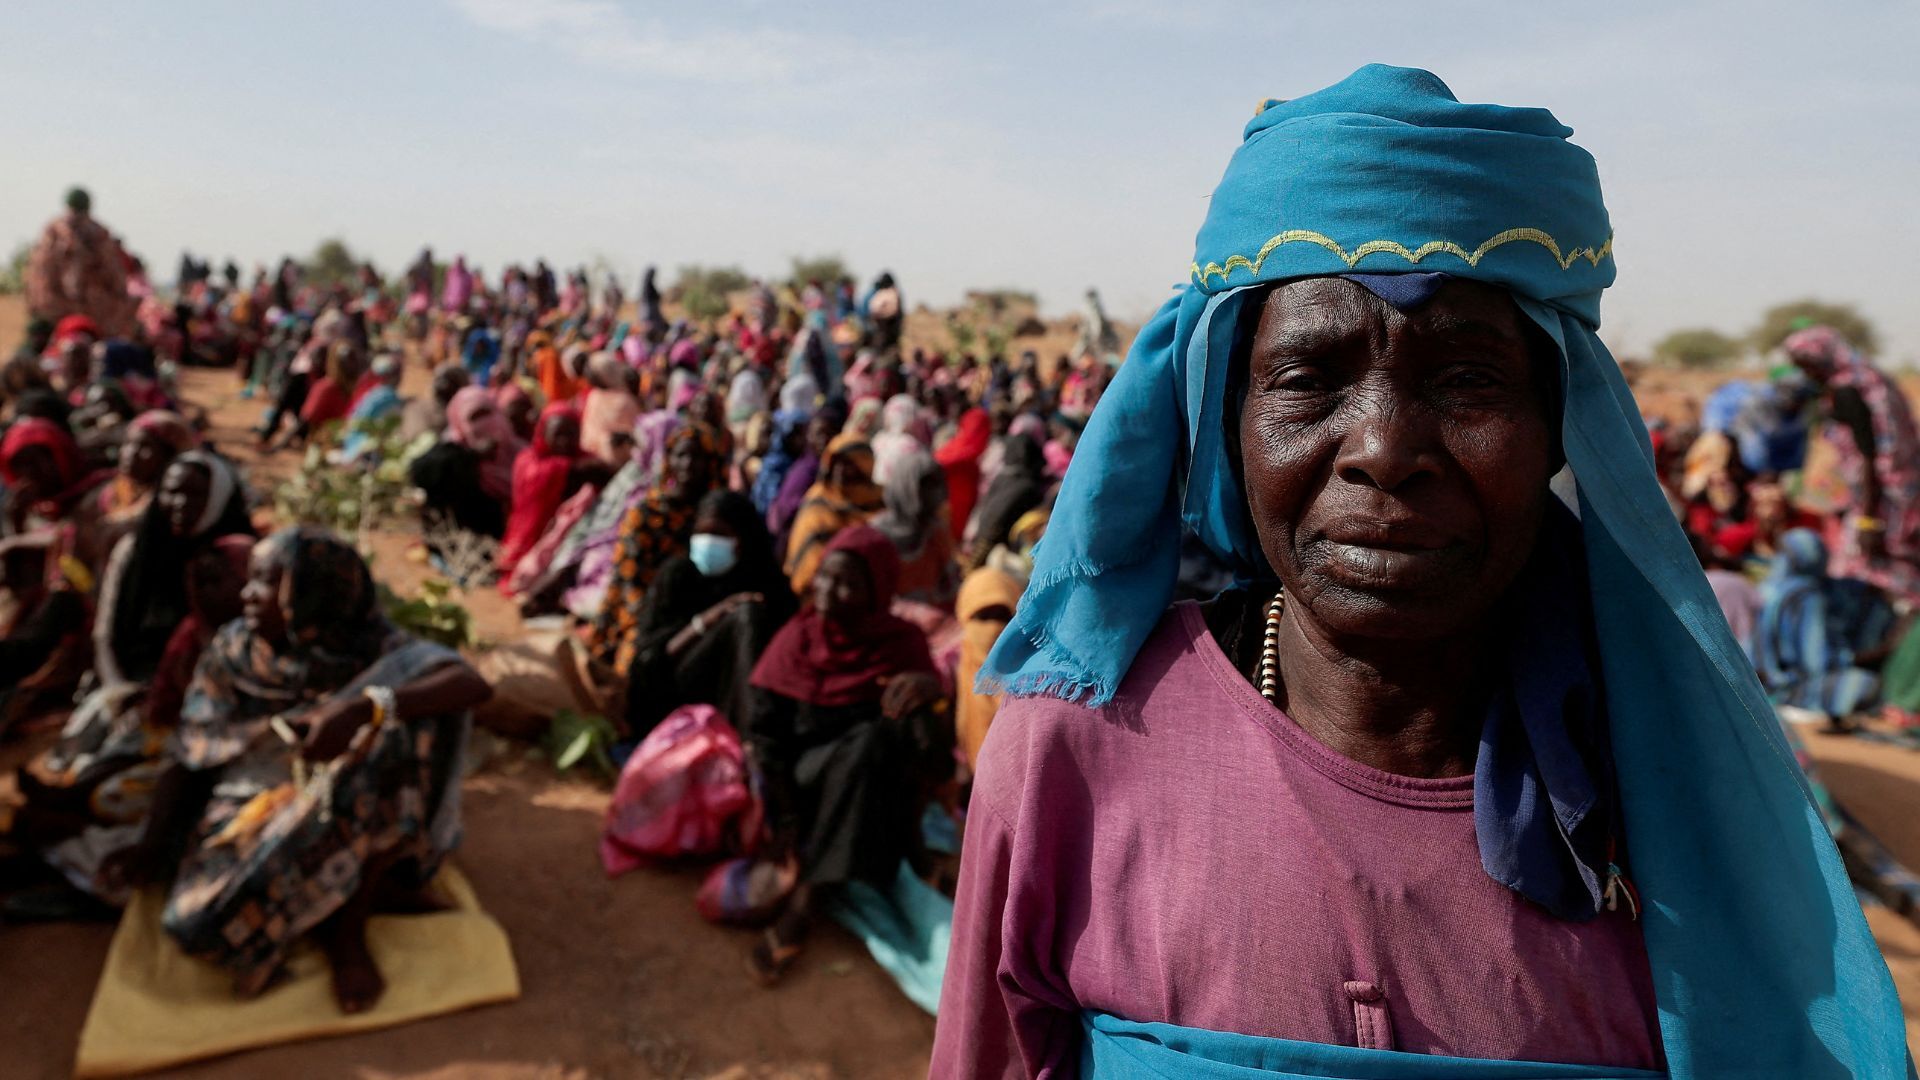 How can the humanitarian crisis in Sudan be stopped? | TV Shows